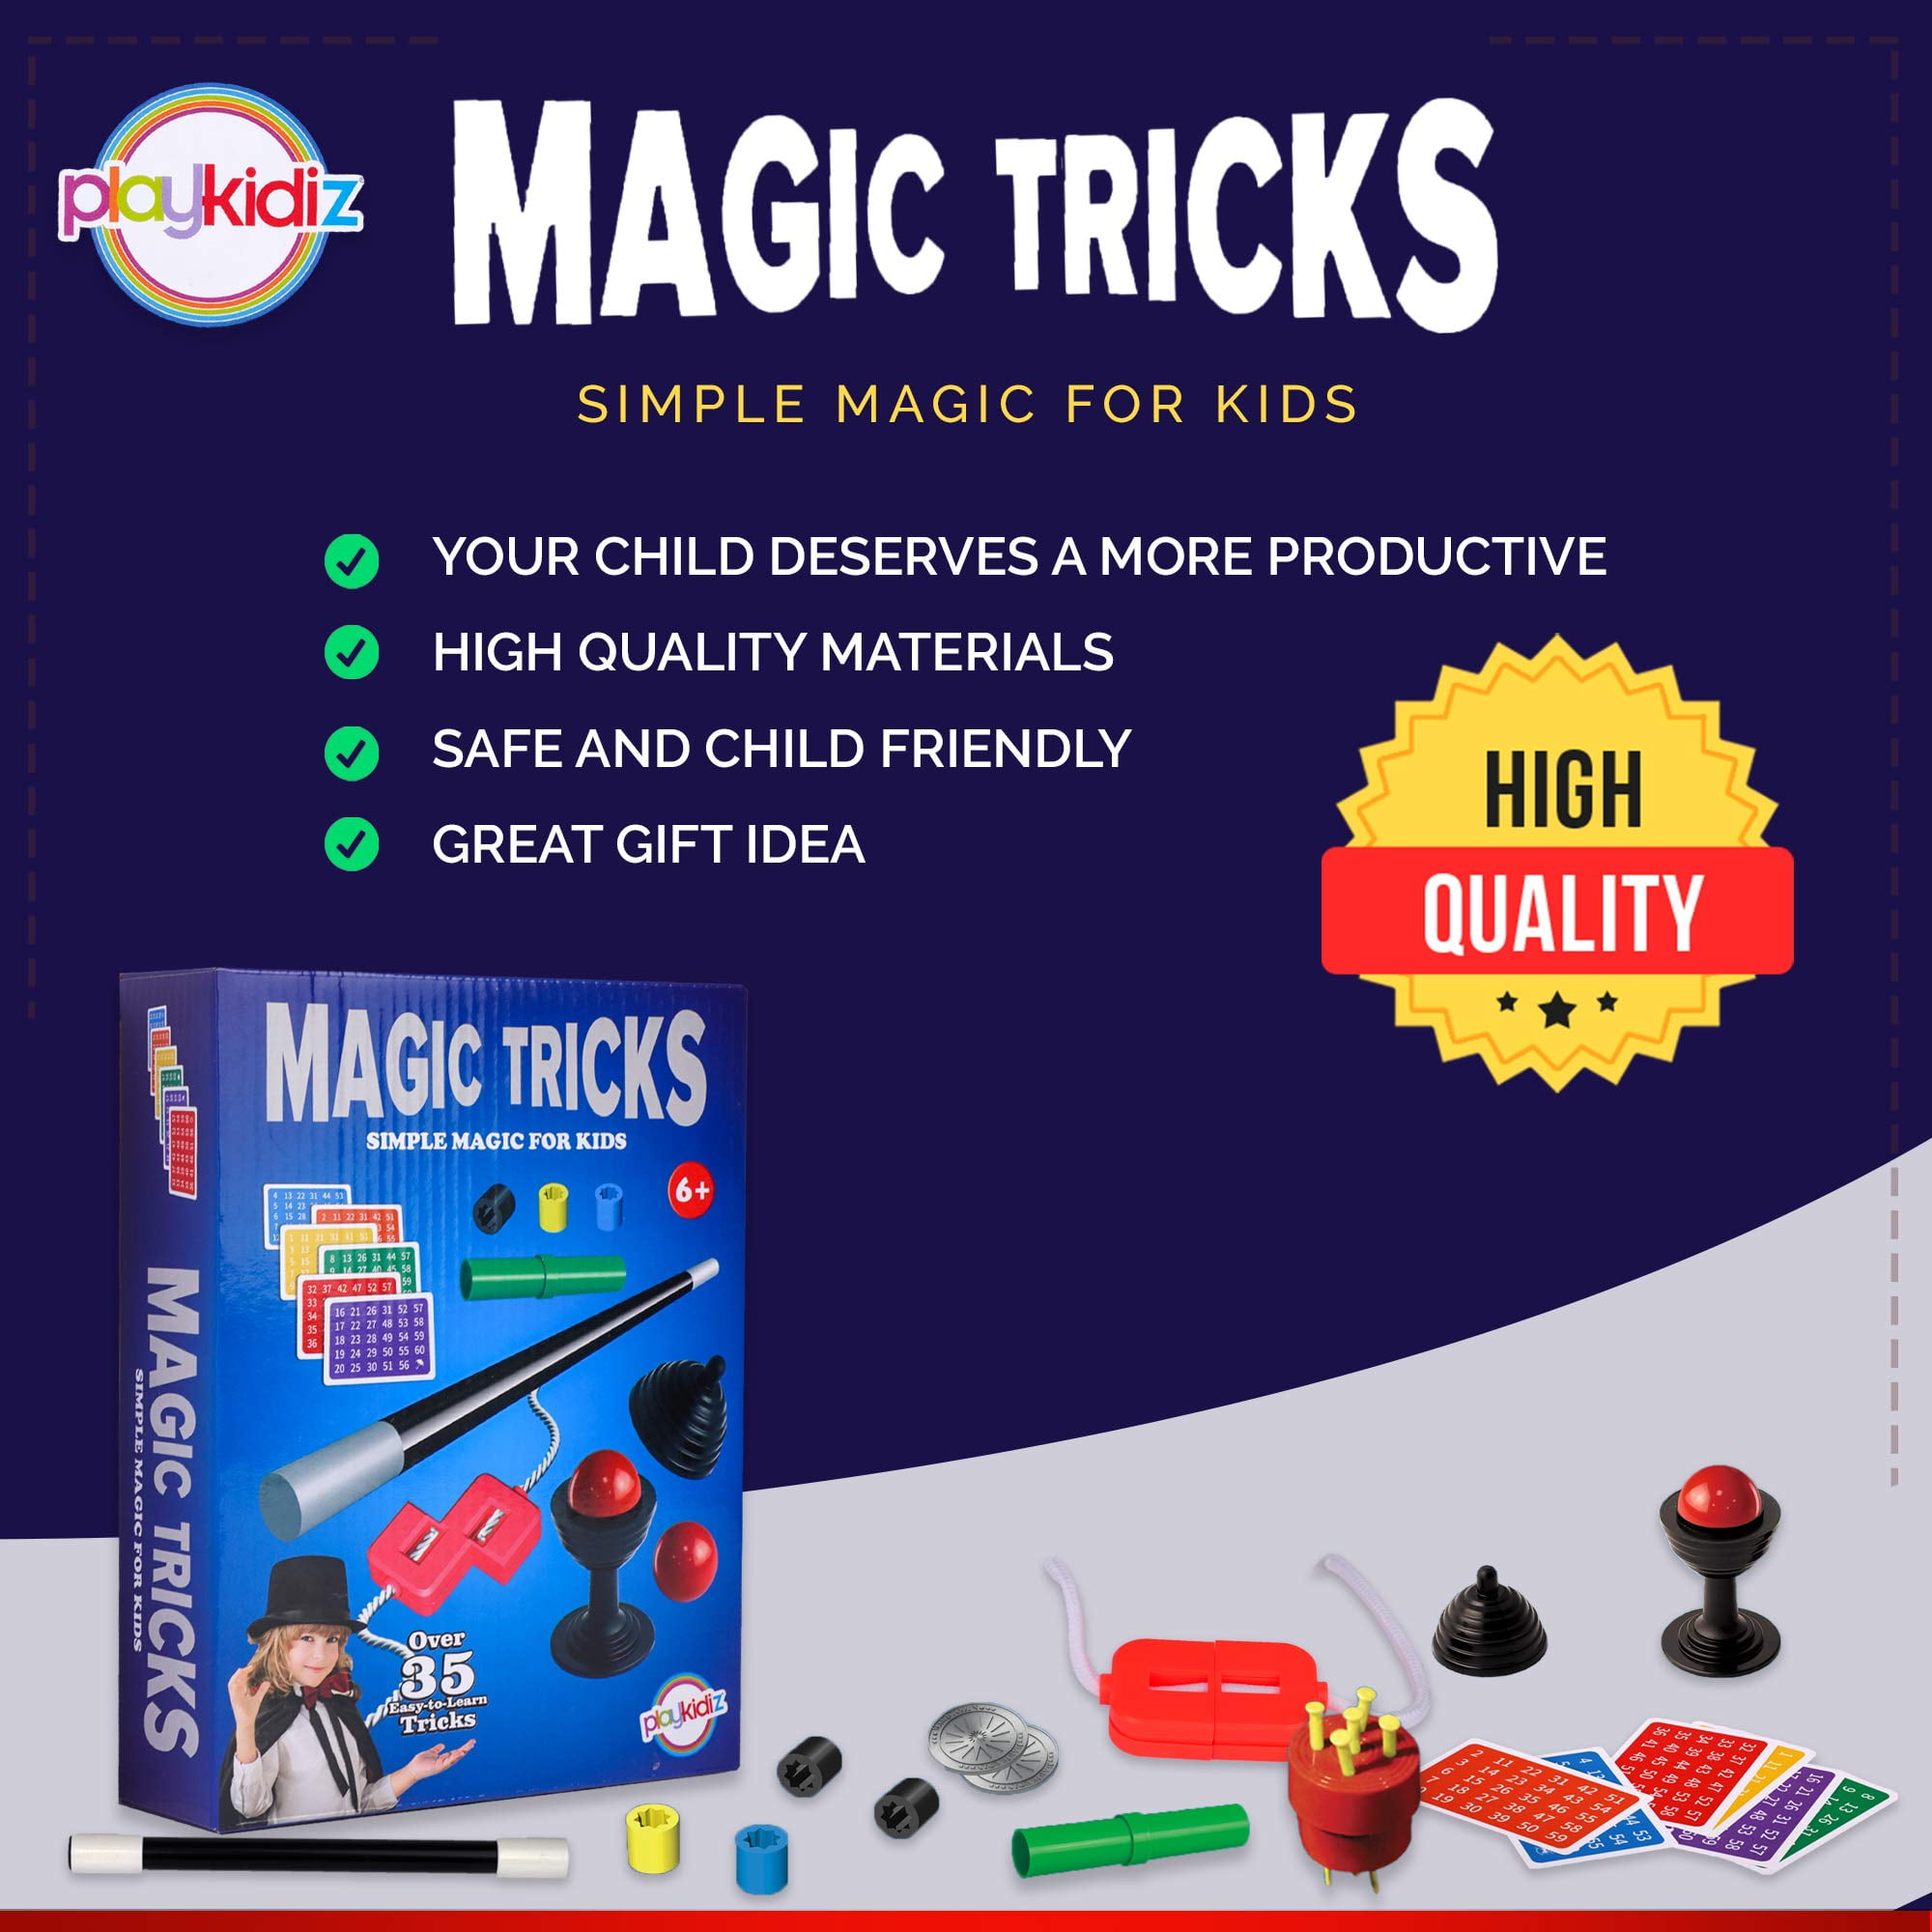 Kids play novelty magic game easy cool magic props toy magic